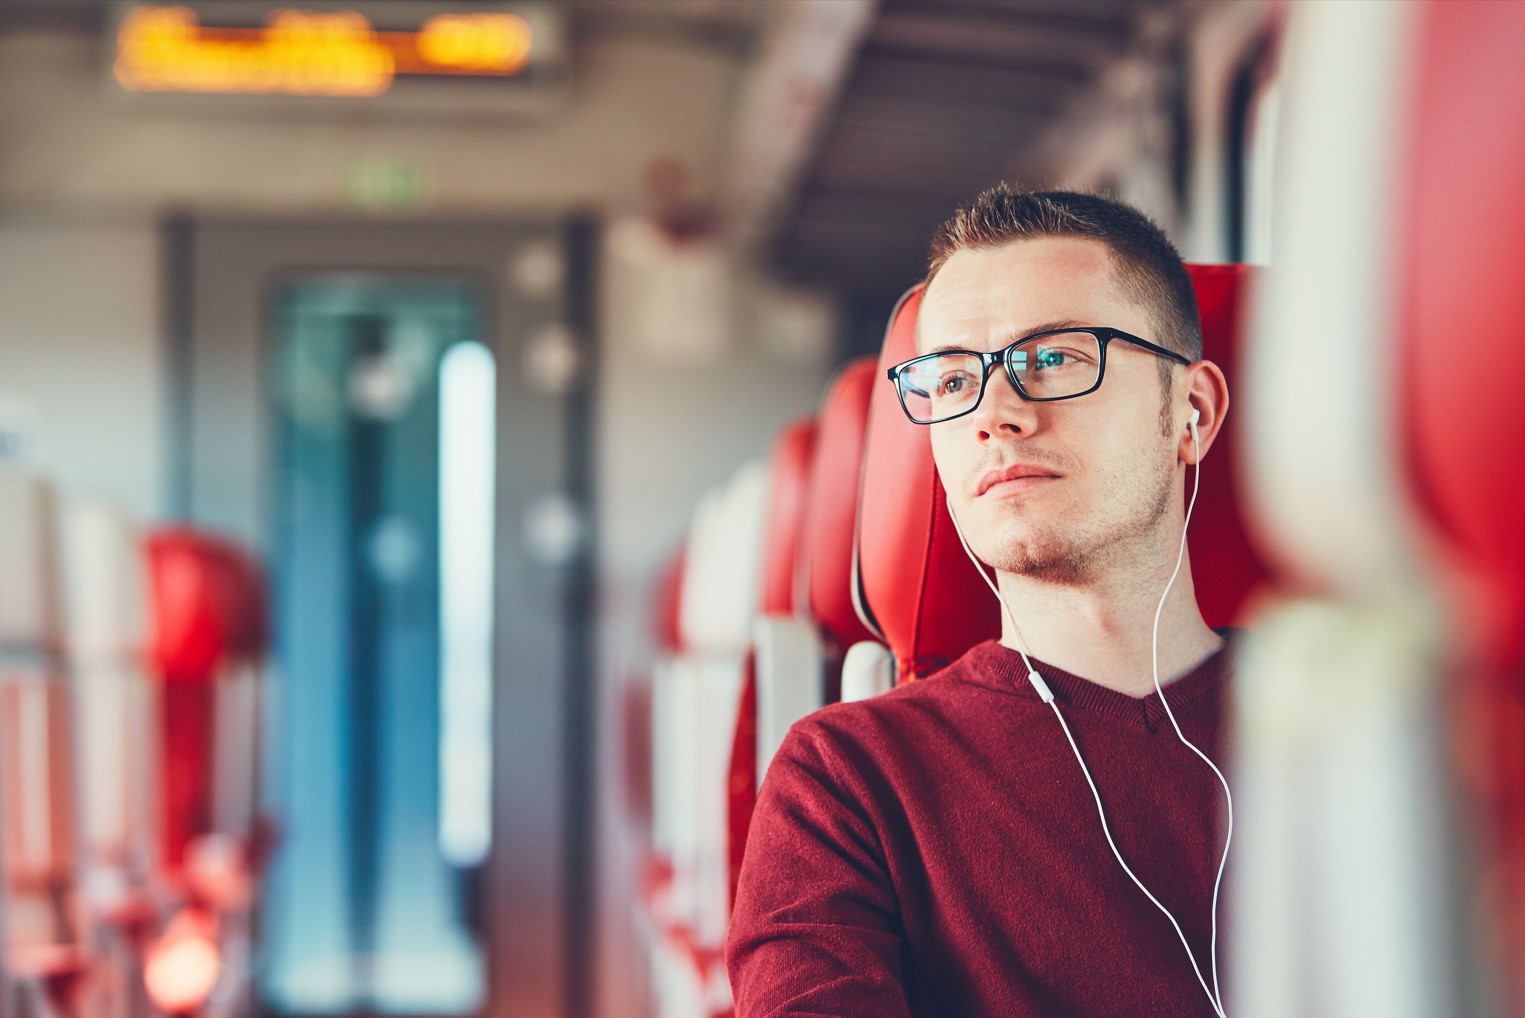 Young man traveling by train implementing tips for protecting your identity while traveling